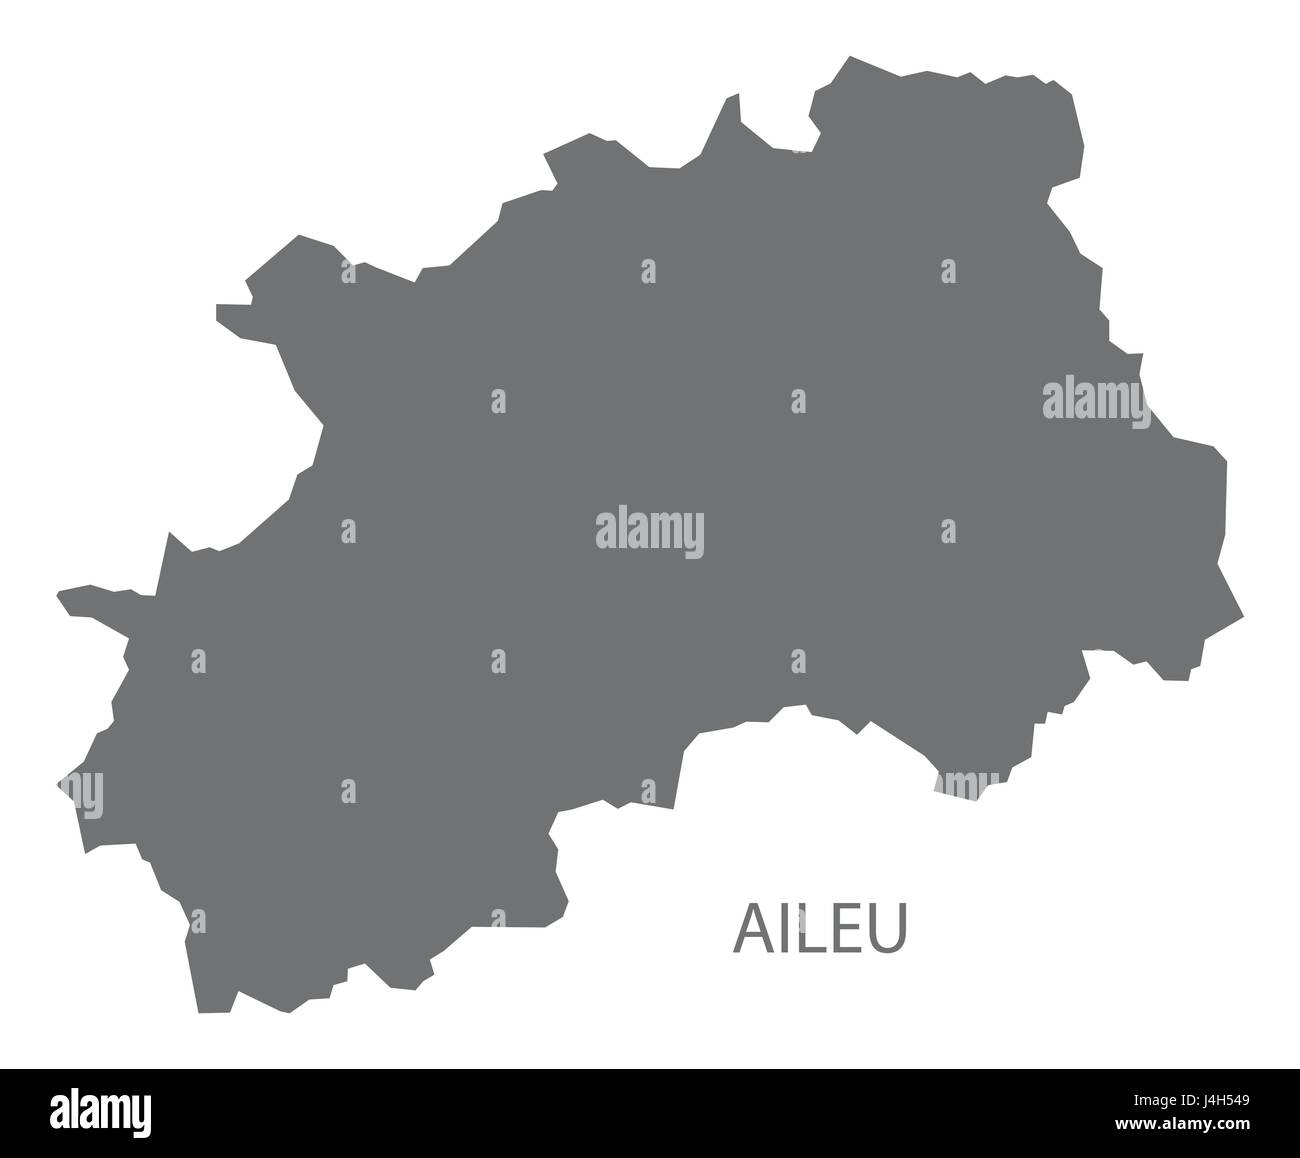 Aileu East Timor map grey illustration silhouette Stock Vector Image ...